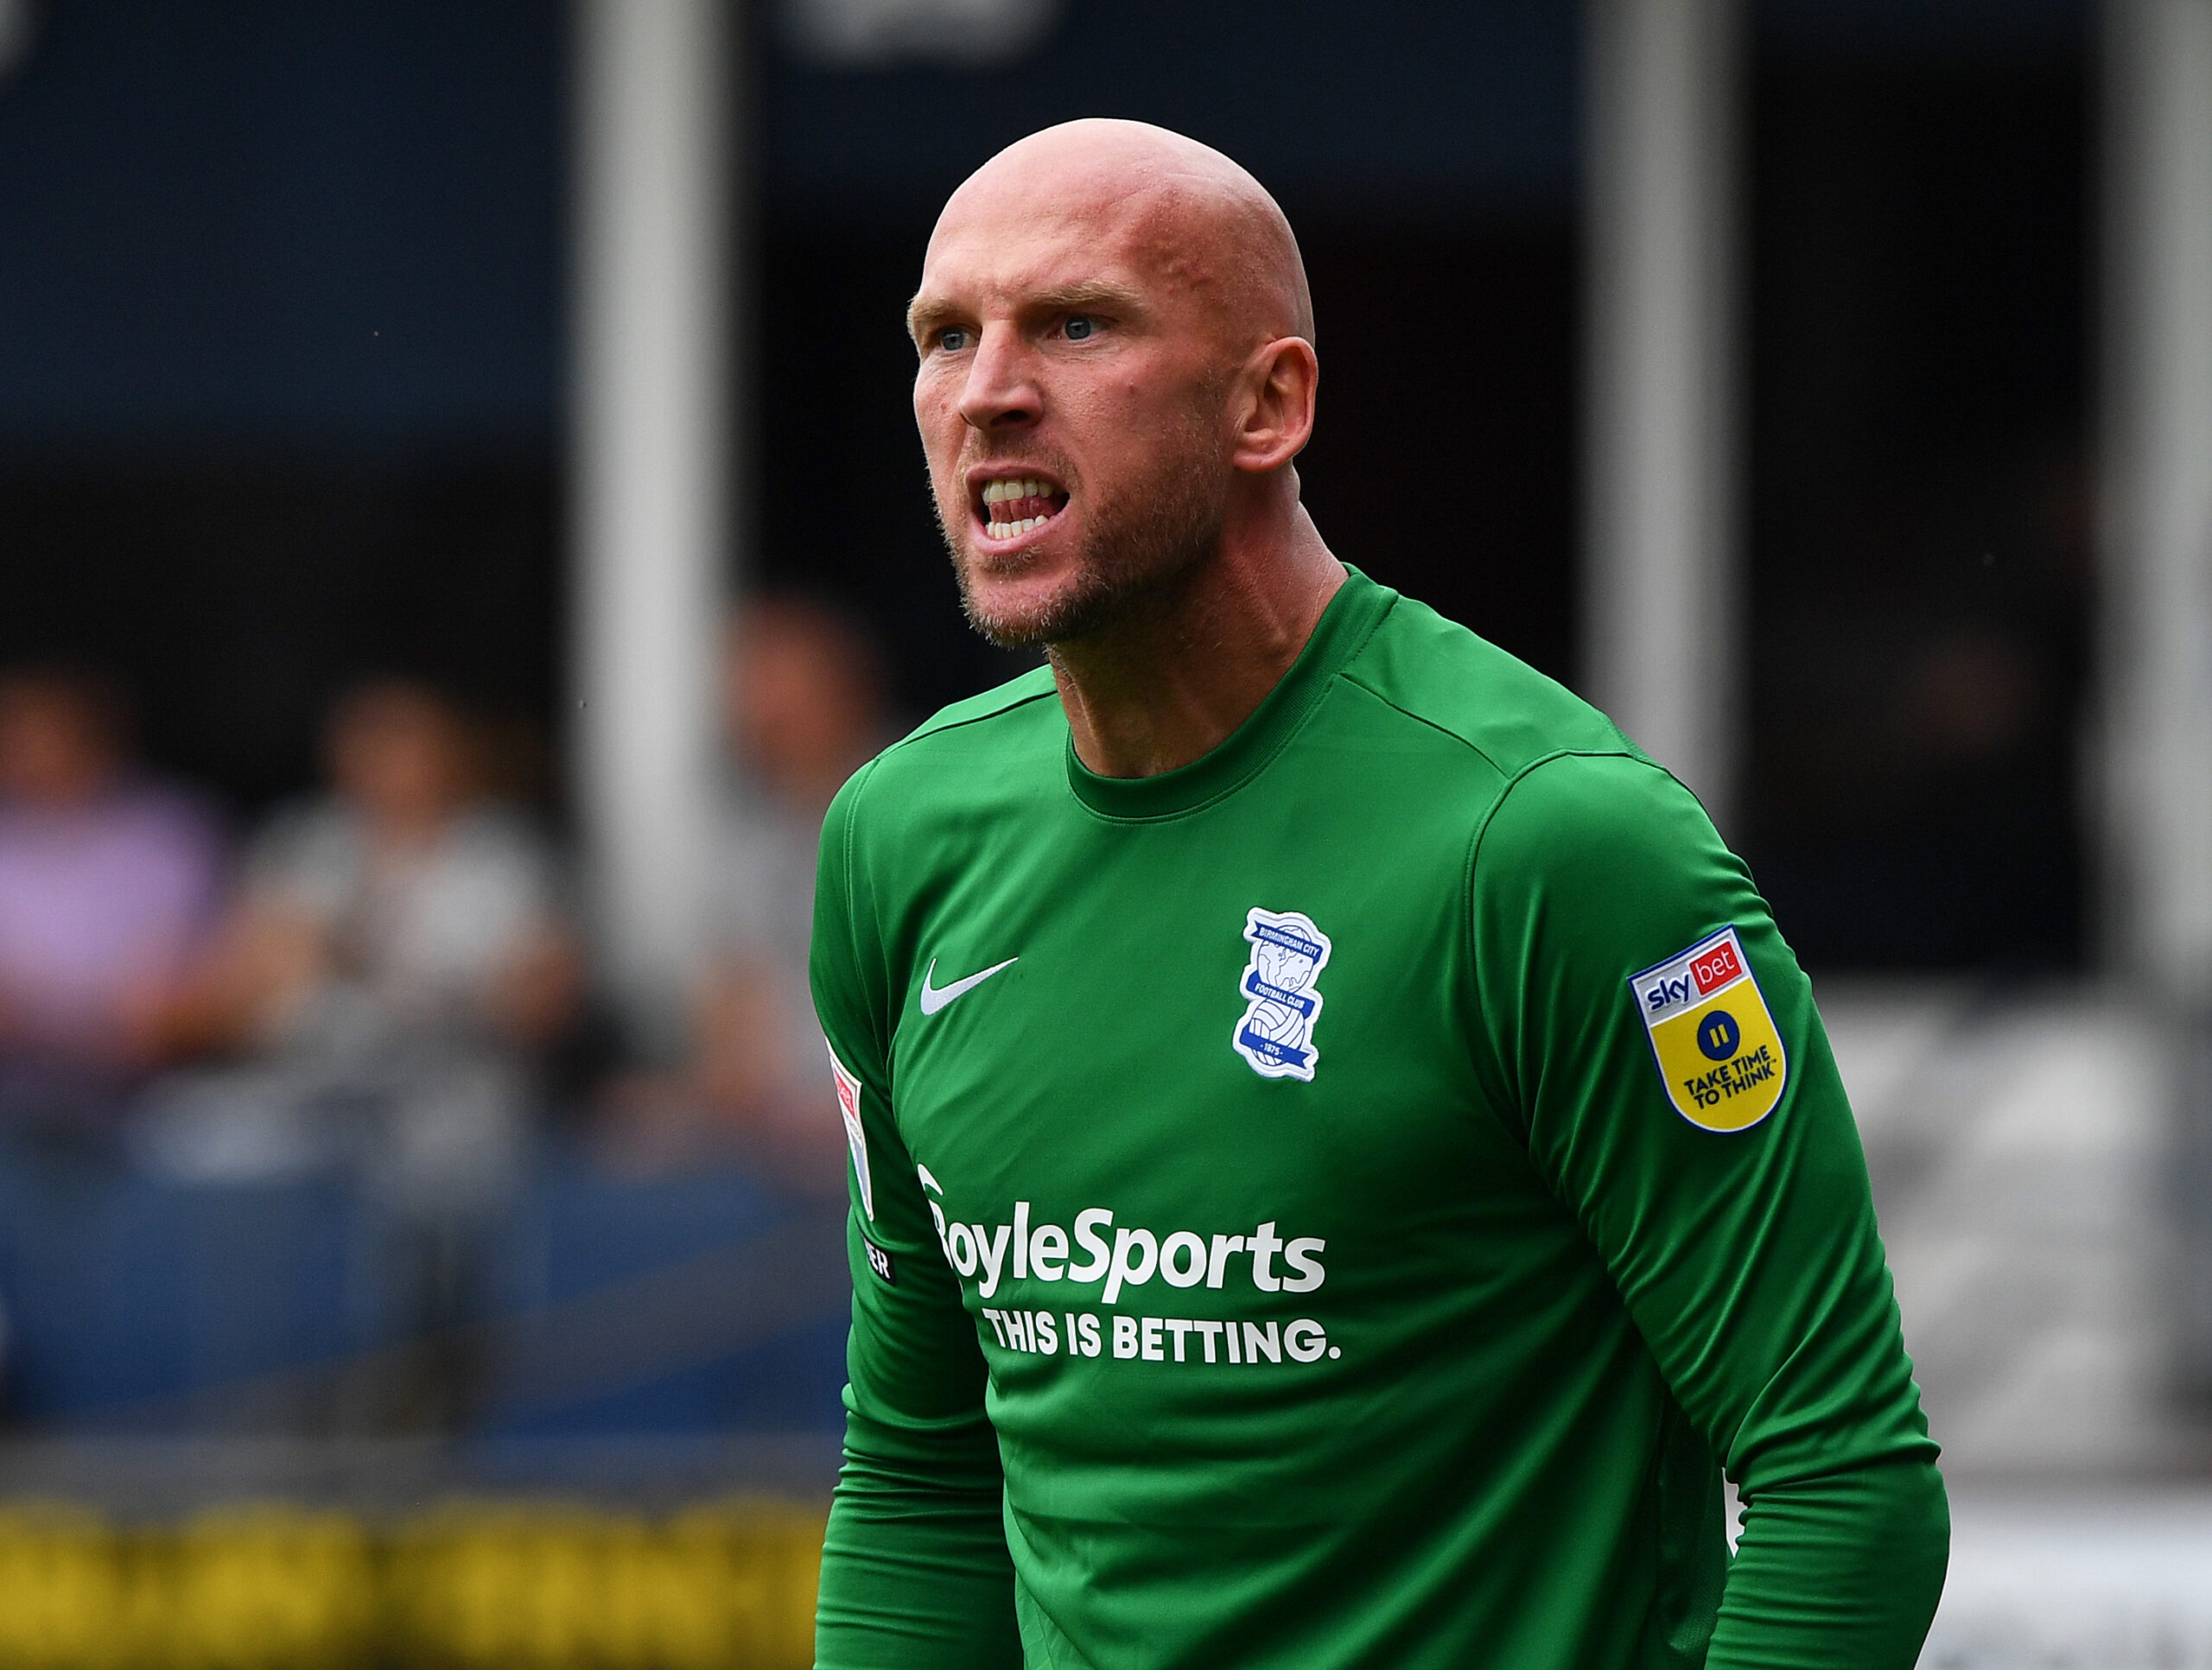 John Ruddy Age, Salary, Net worth, Current Teams, Career, Height, and much more